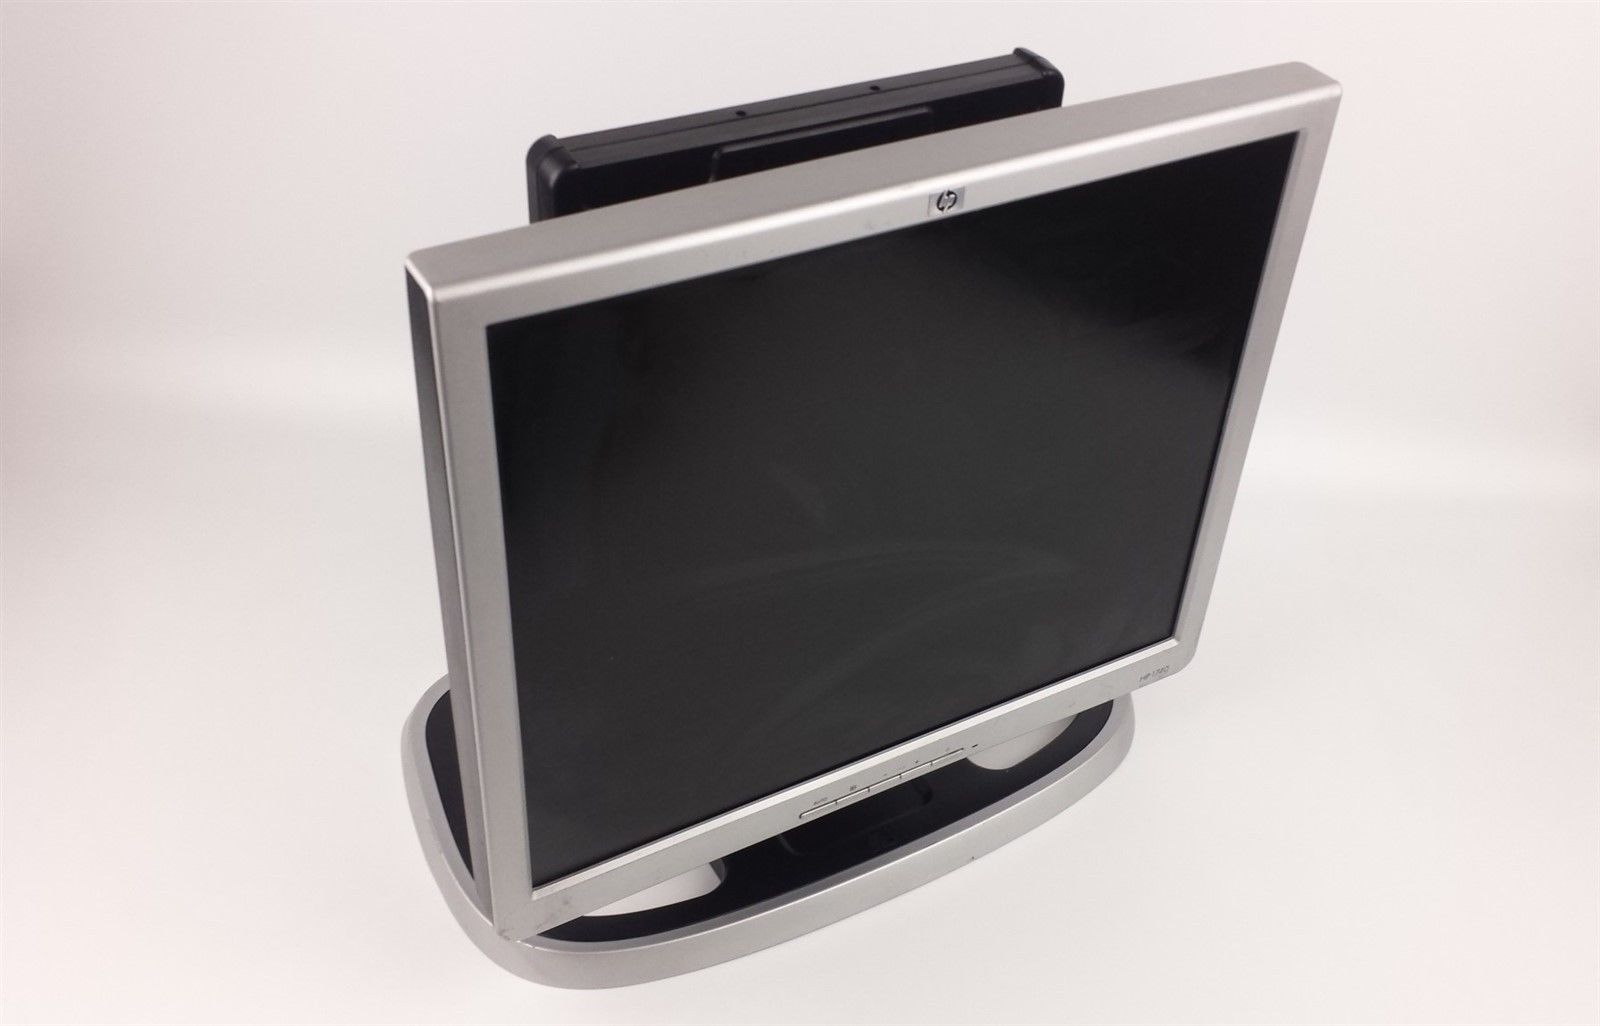 HP 1740 LCD Flat Panel Display Monitor 17" with Power Cord VGA Cord Solid Stand